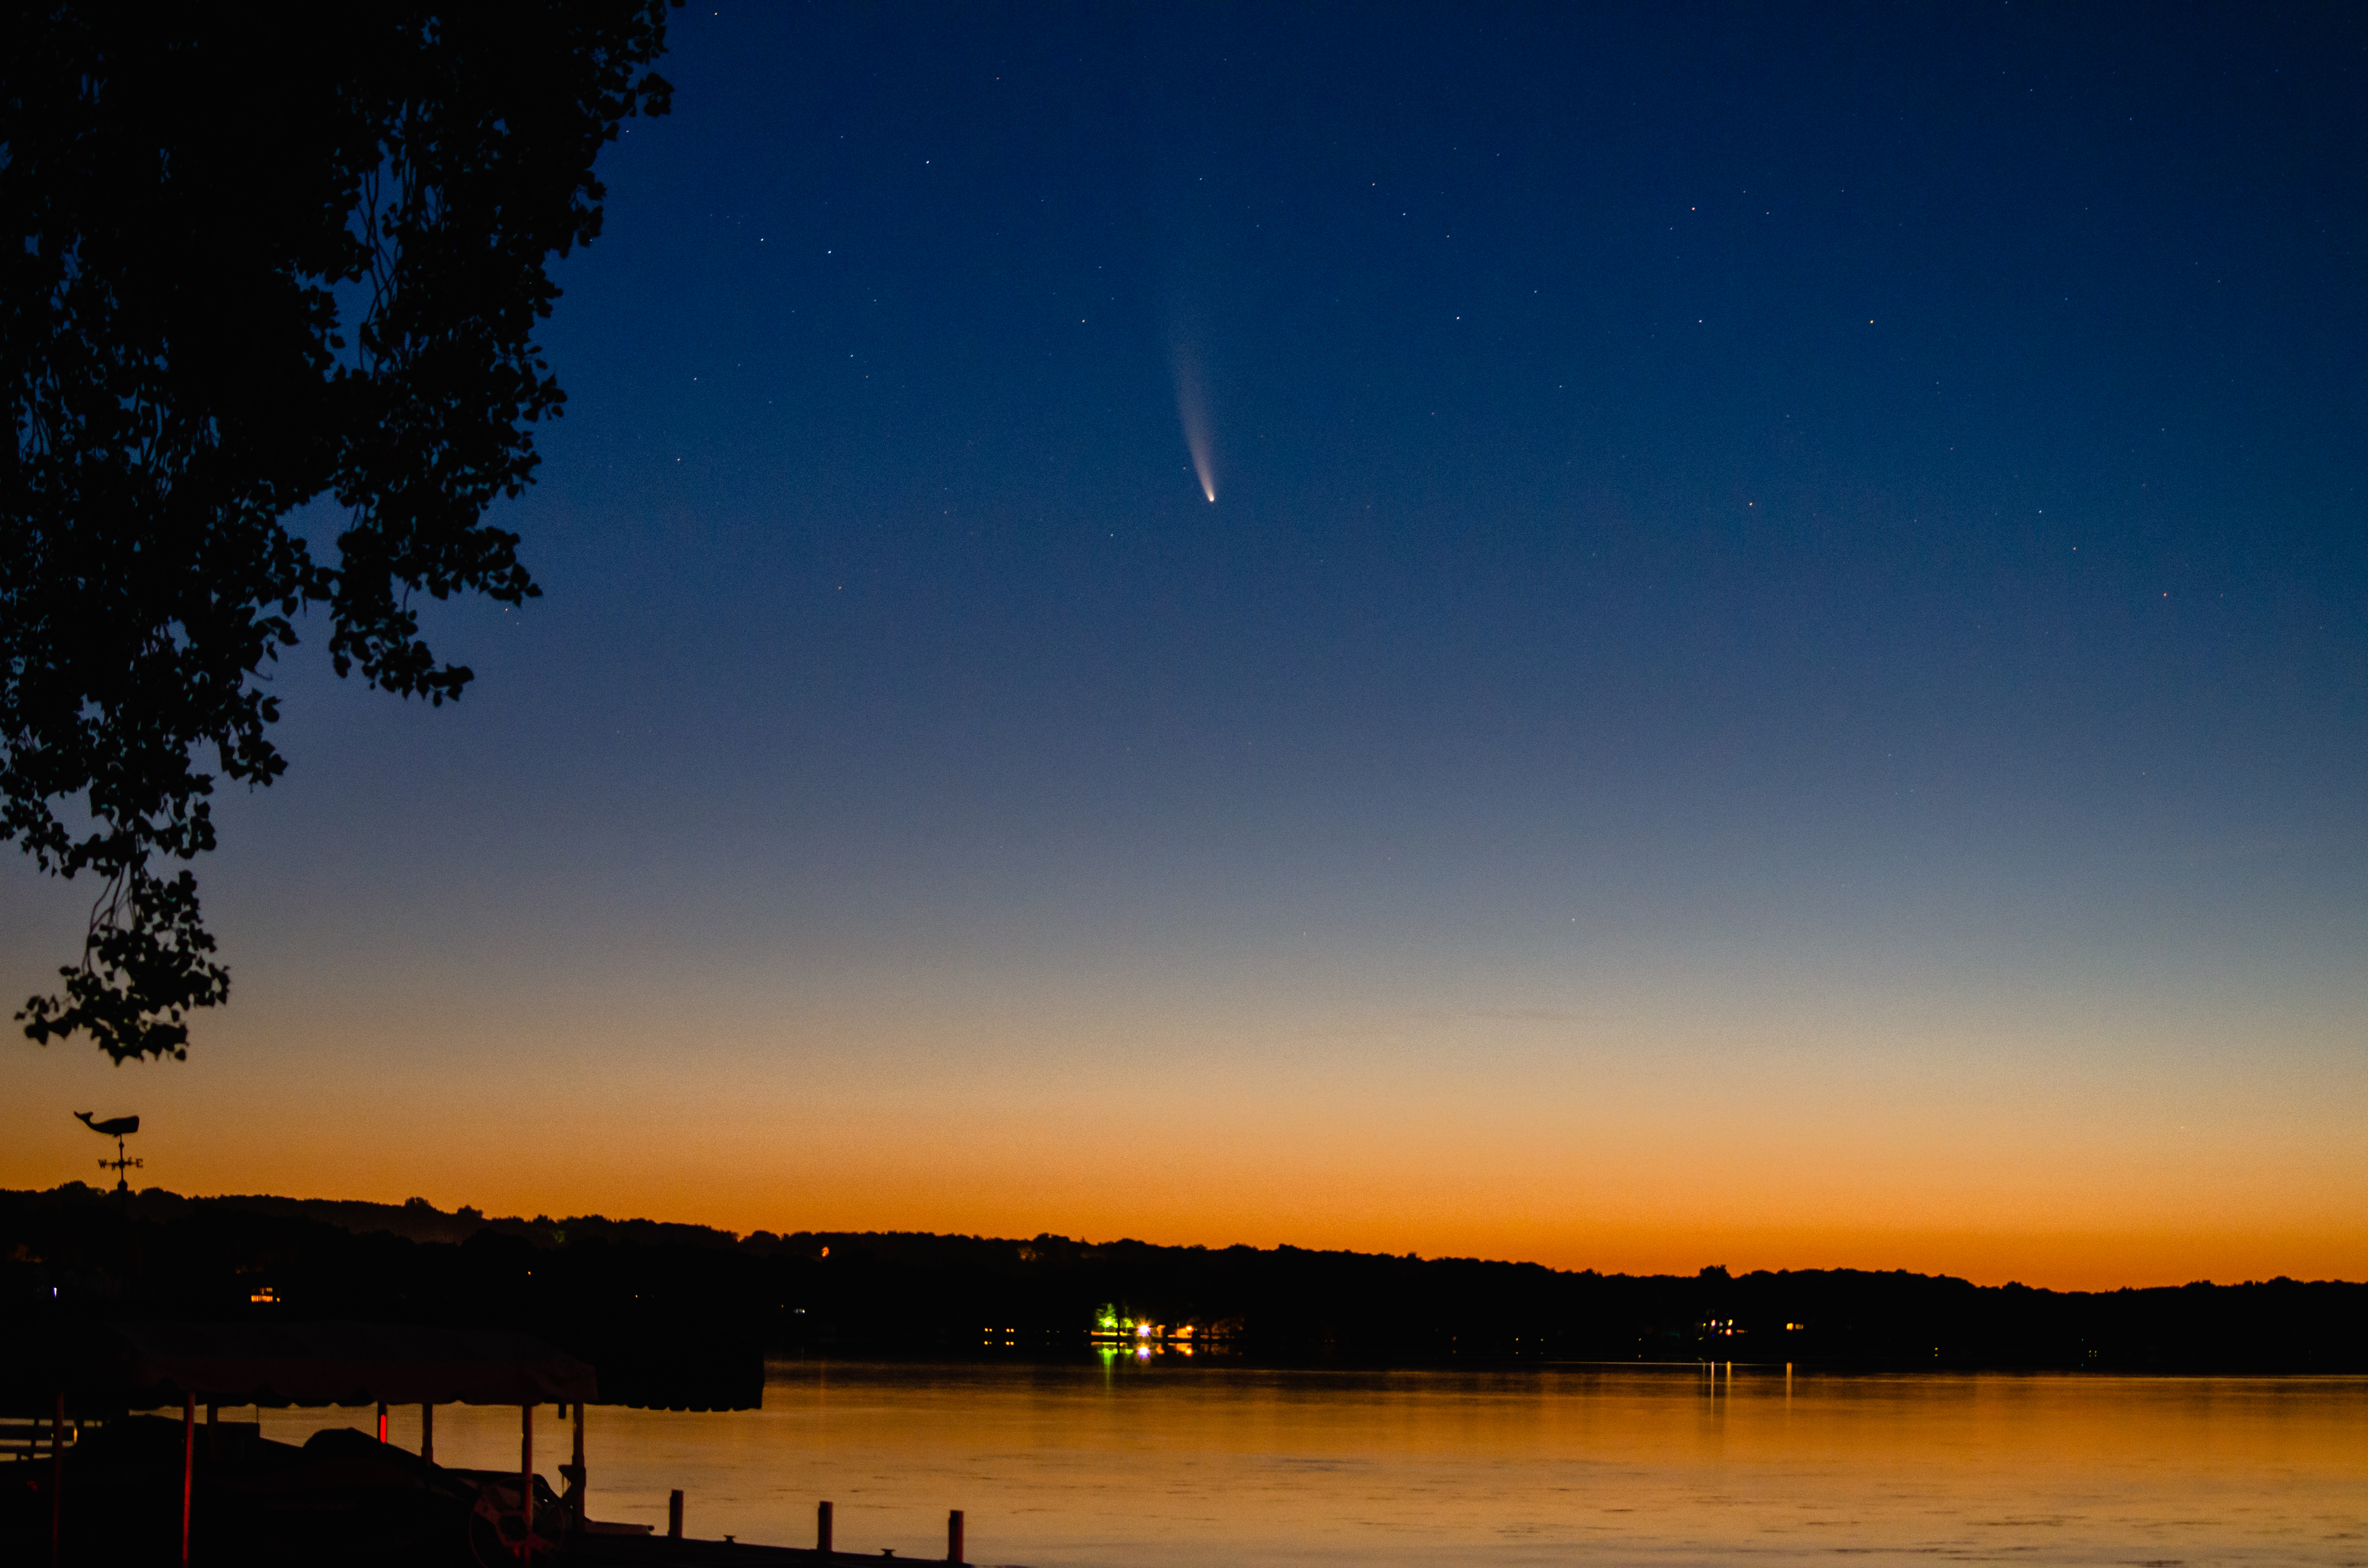 photo of comet over body of water during sunset